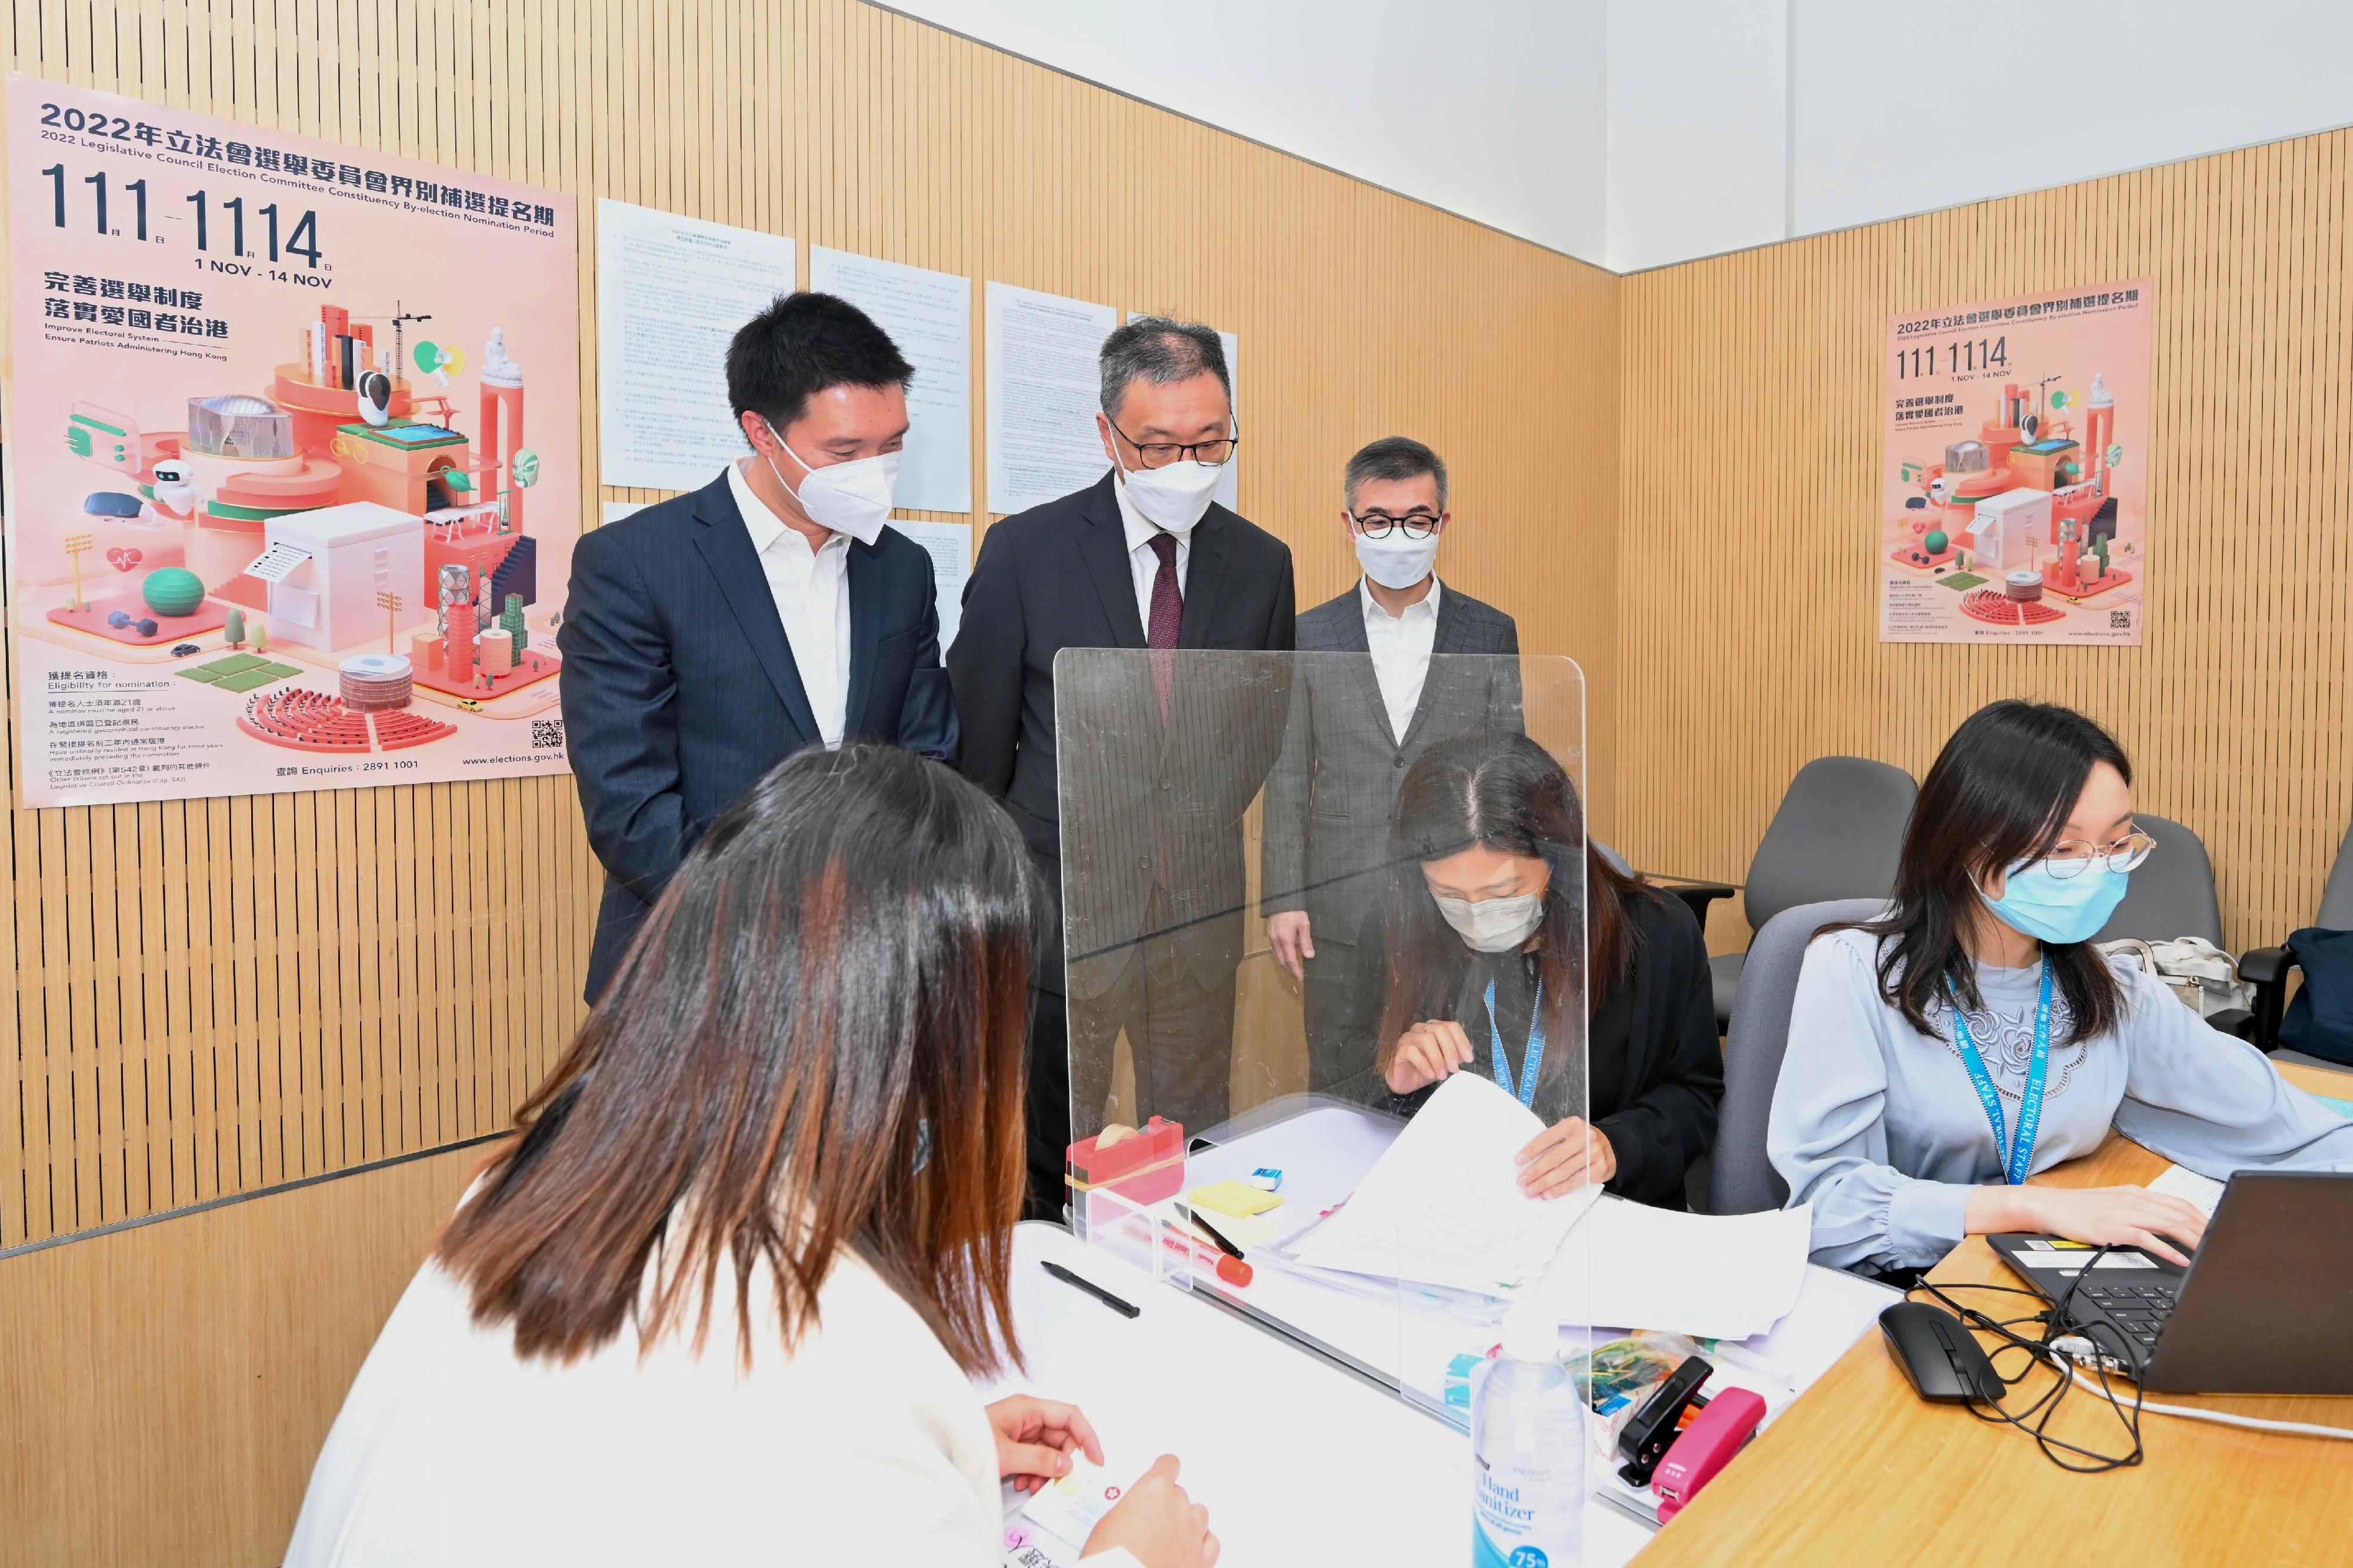 The Chairman of the Election Affairs Commission, Mr Justice David Lok (back row, centre), today (October 31) visits the Returning Officer's office at the Central Government Offices where nomination forms for the 2022 Legislative Council Election Committee constituency by-election will be received to inspect the procedures for receiving nomination forms. Also present are the Returning Officer, Mr Ricky Cheng (back row, left), and the Chief Electoral Officer of the Registration and Electoral Office, Mr Raymond Wang (back row, right).